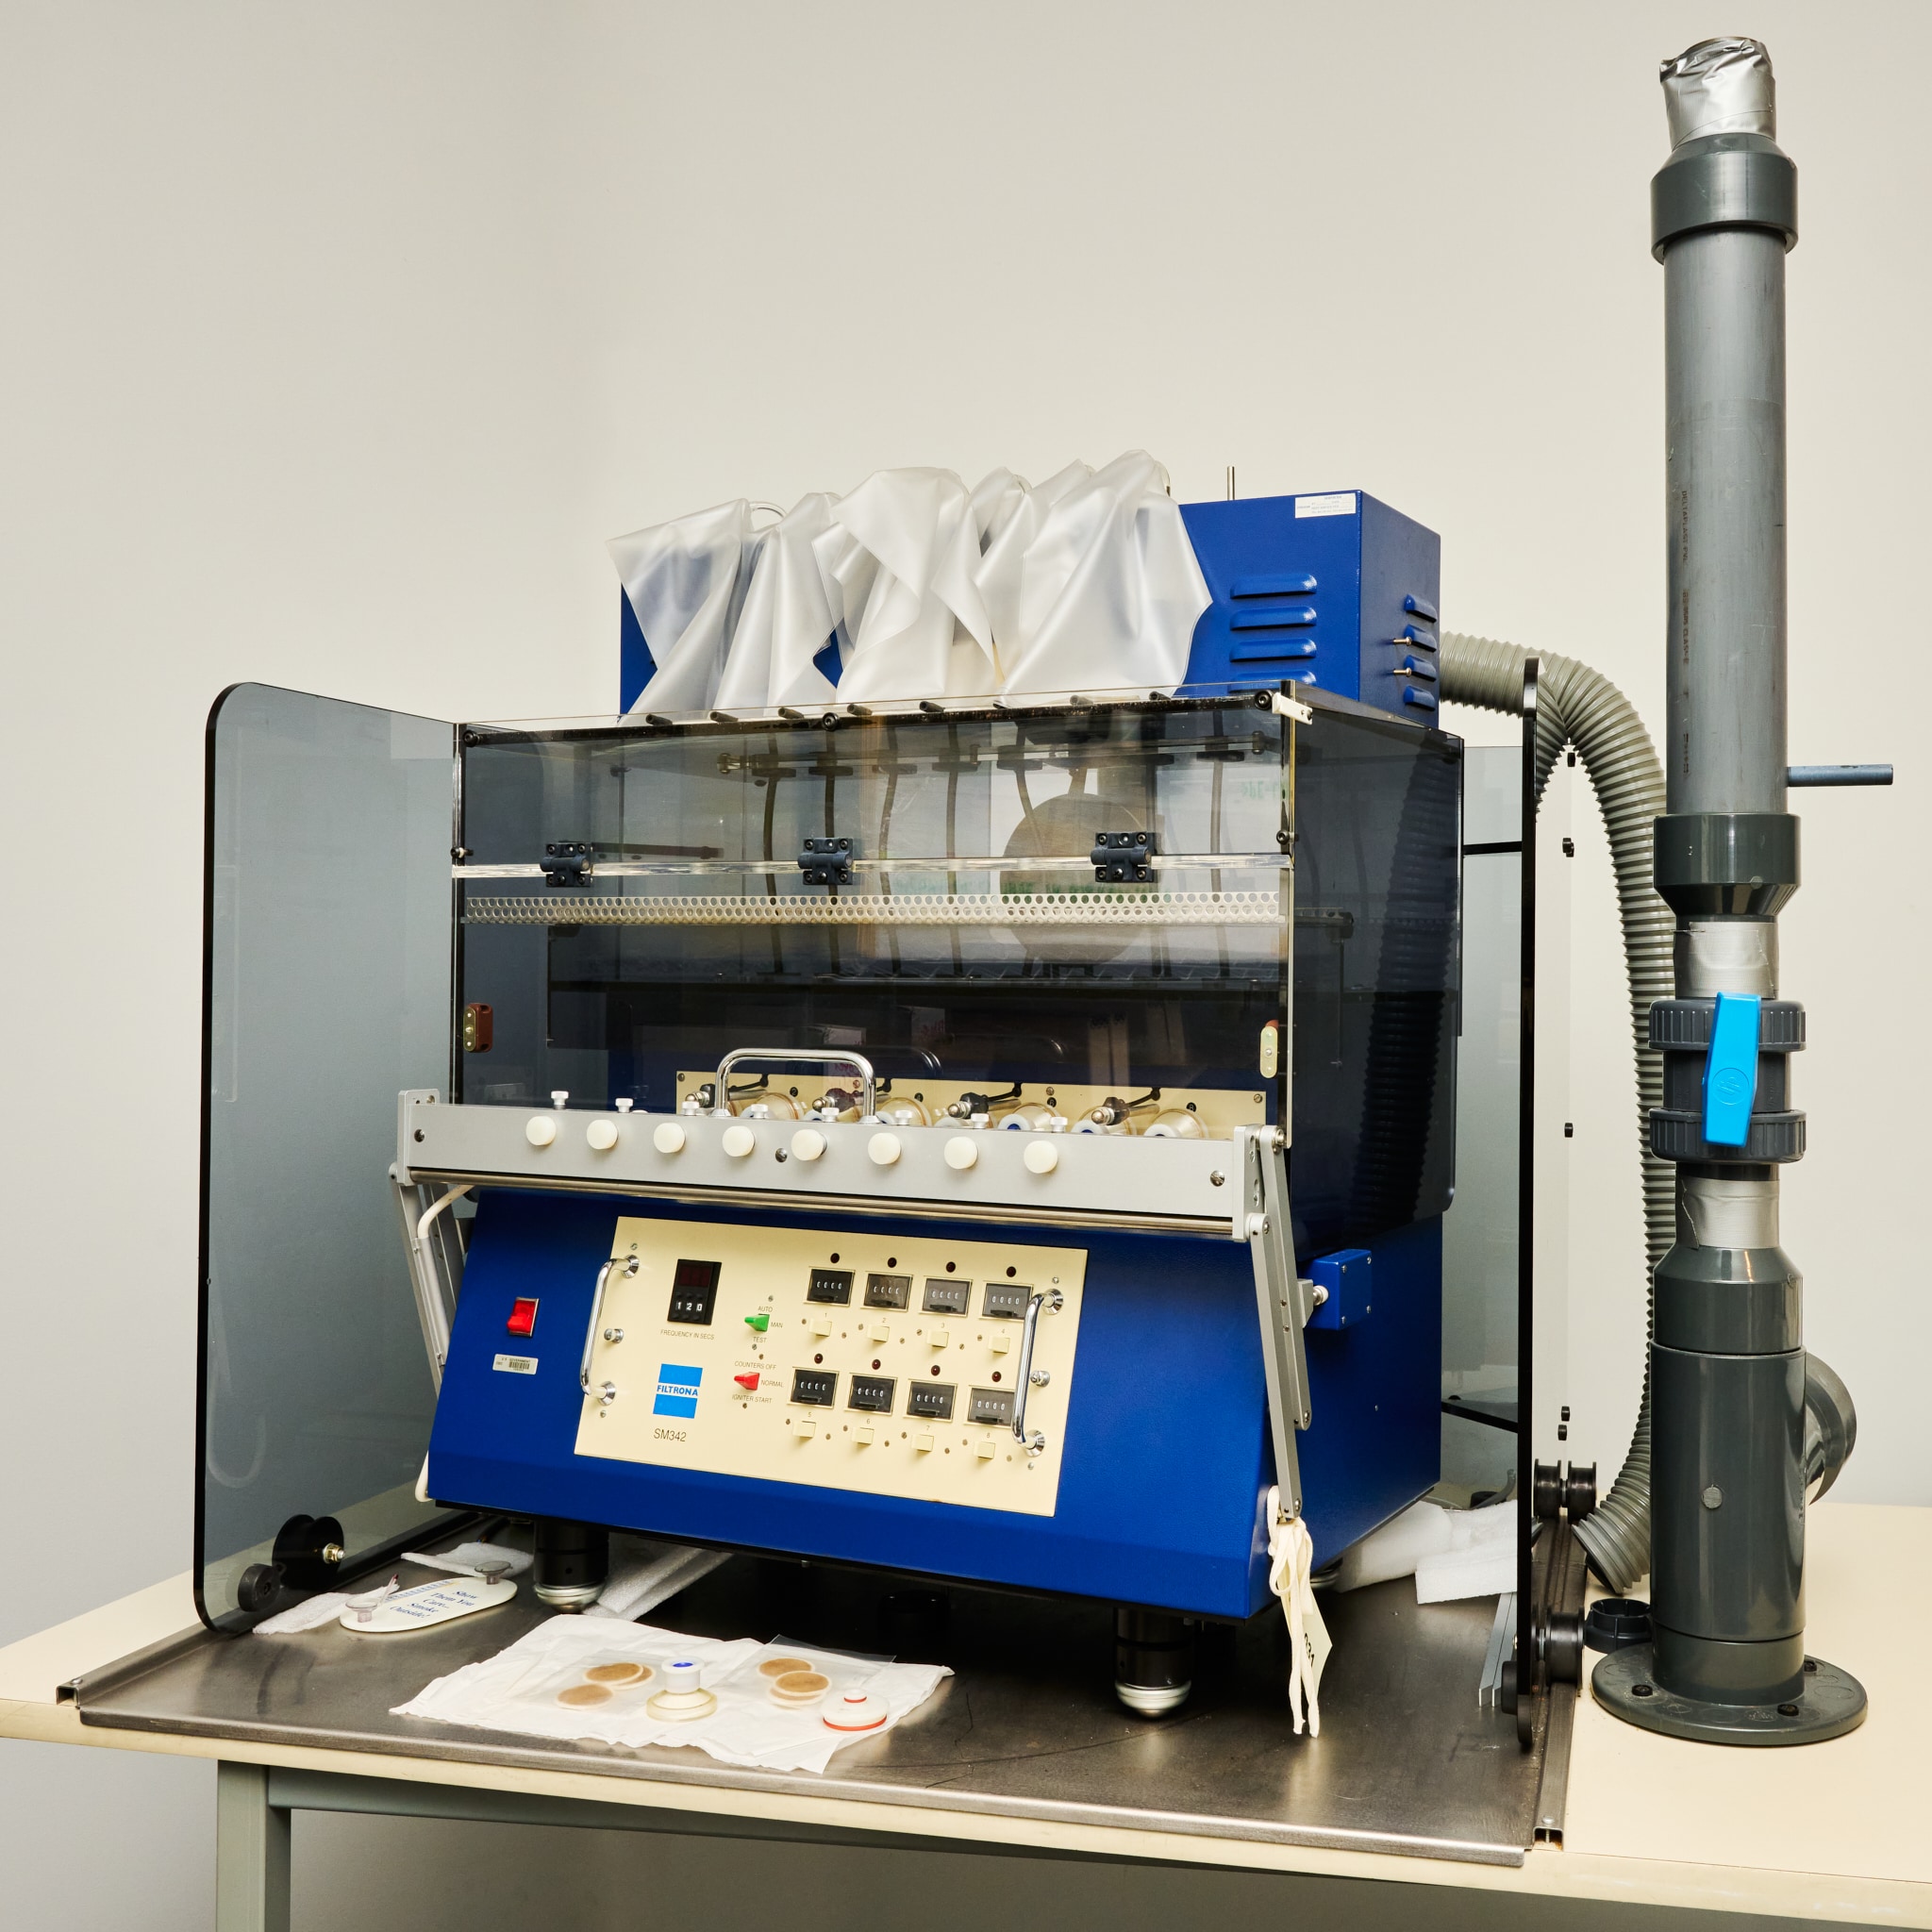 Harmonized 8 Channel Smoking Machine (1994) that was used by the CDC Tobacco Laboratory till the early 2000s